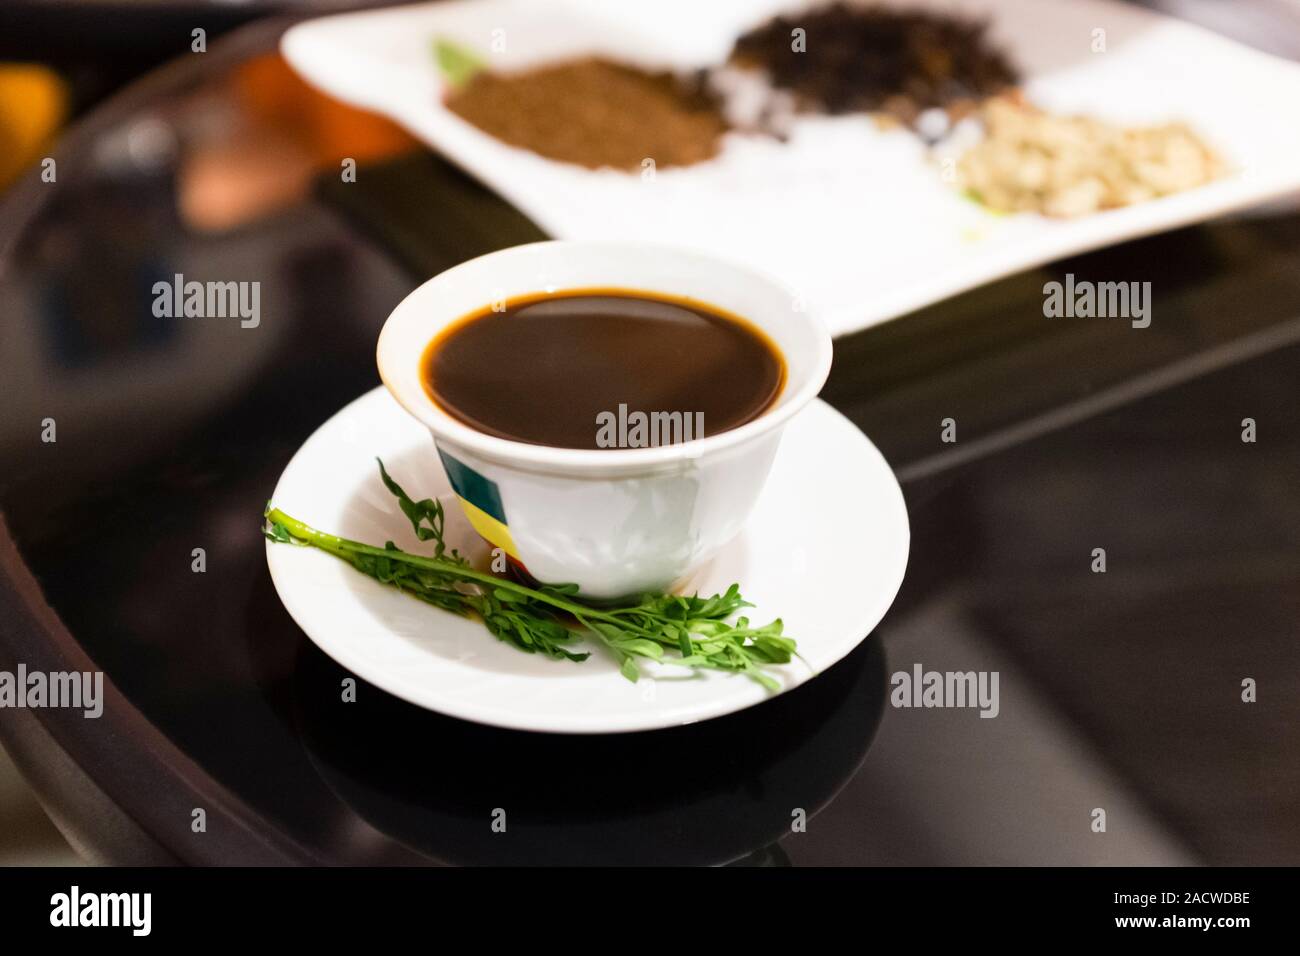 A cup of buna (Ethiopian coffee), served with Tena'adam leaves, in Addis Ababa, Ethiopia Stock Photo